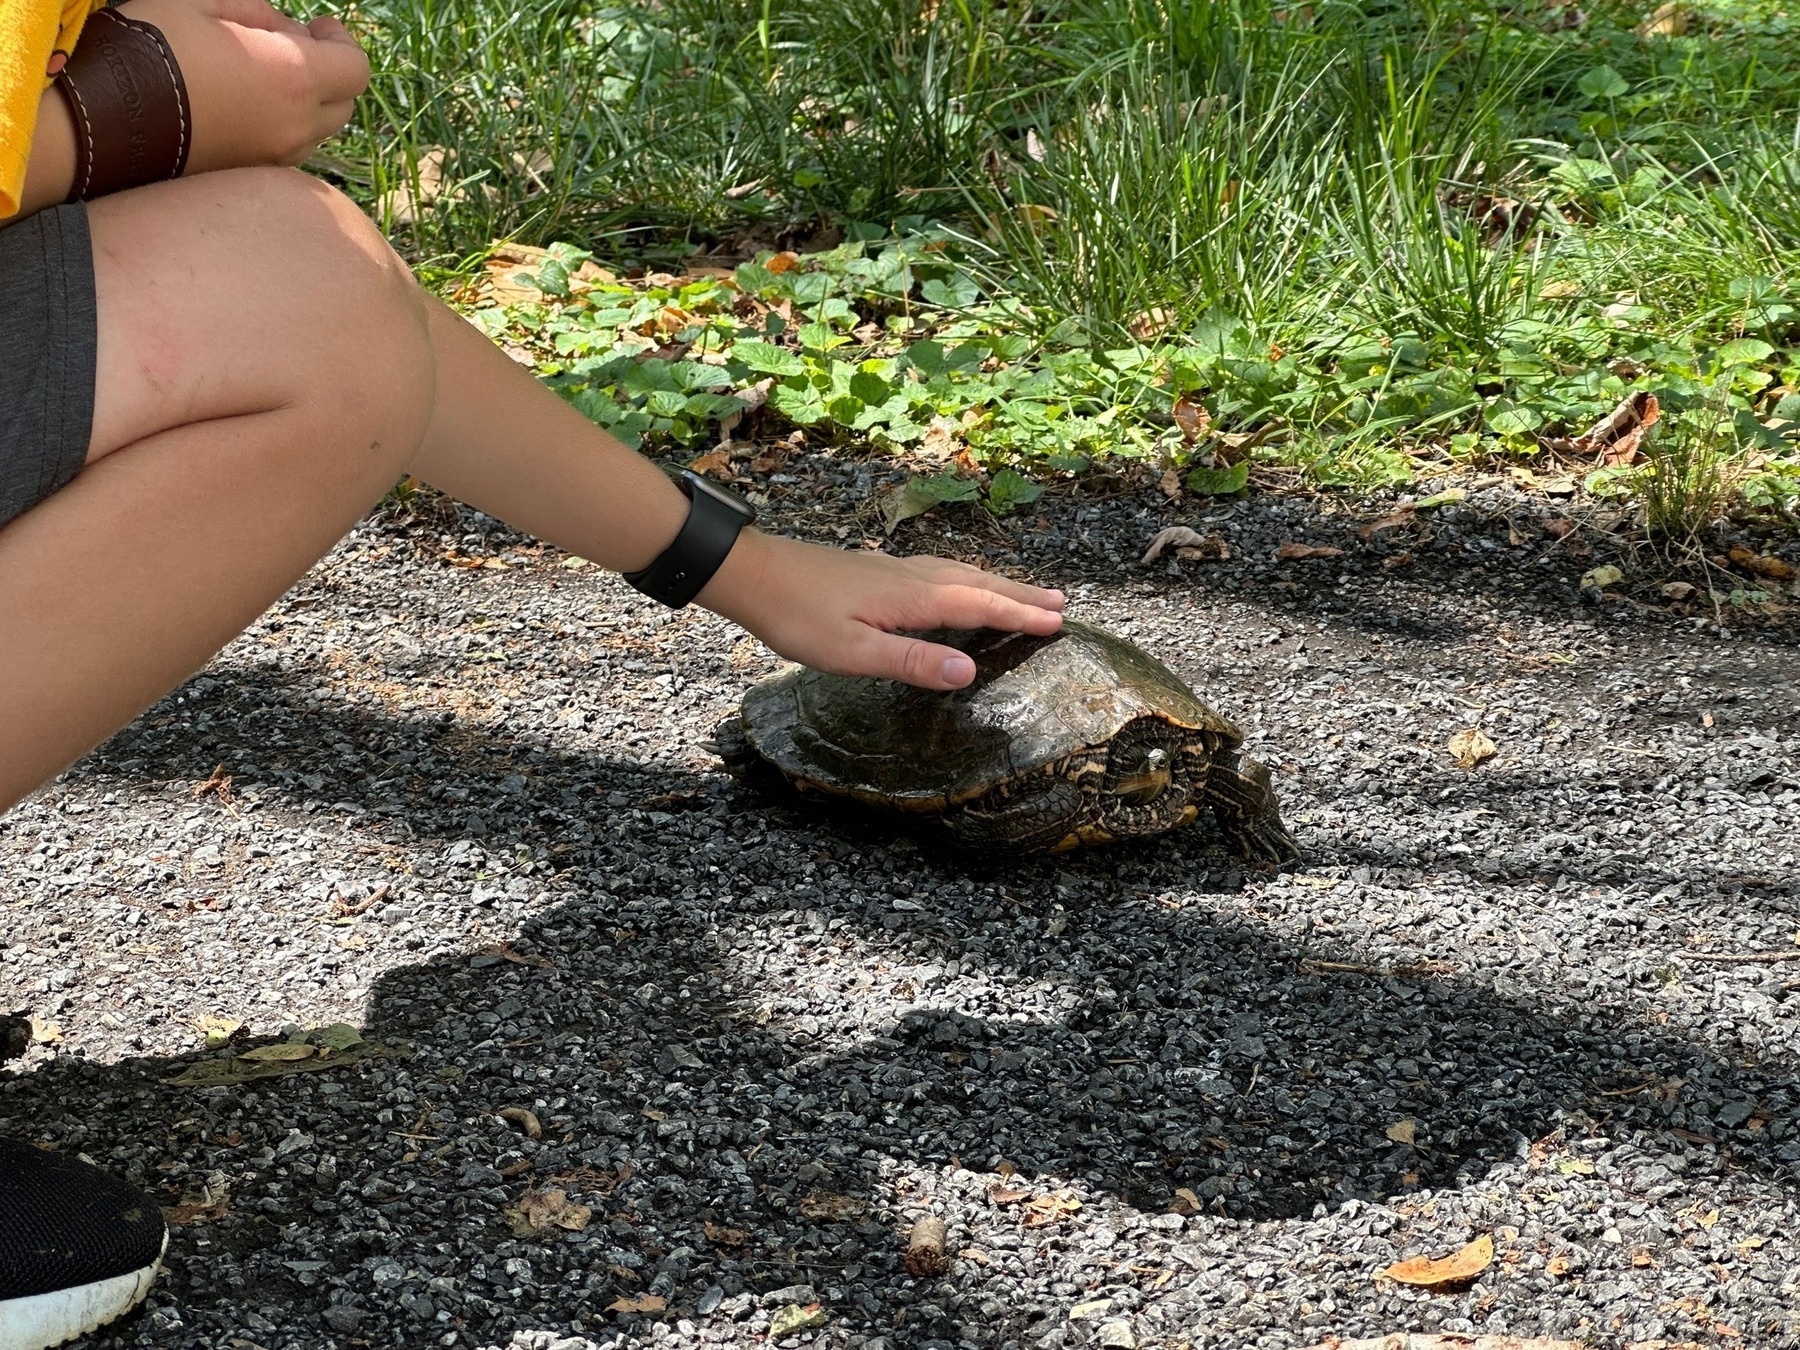 Turtle on pavement, young boy patting his shell.